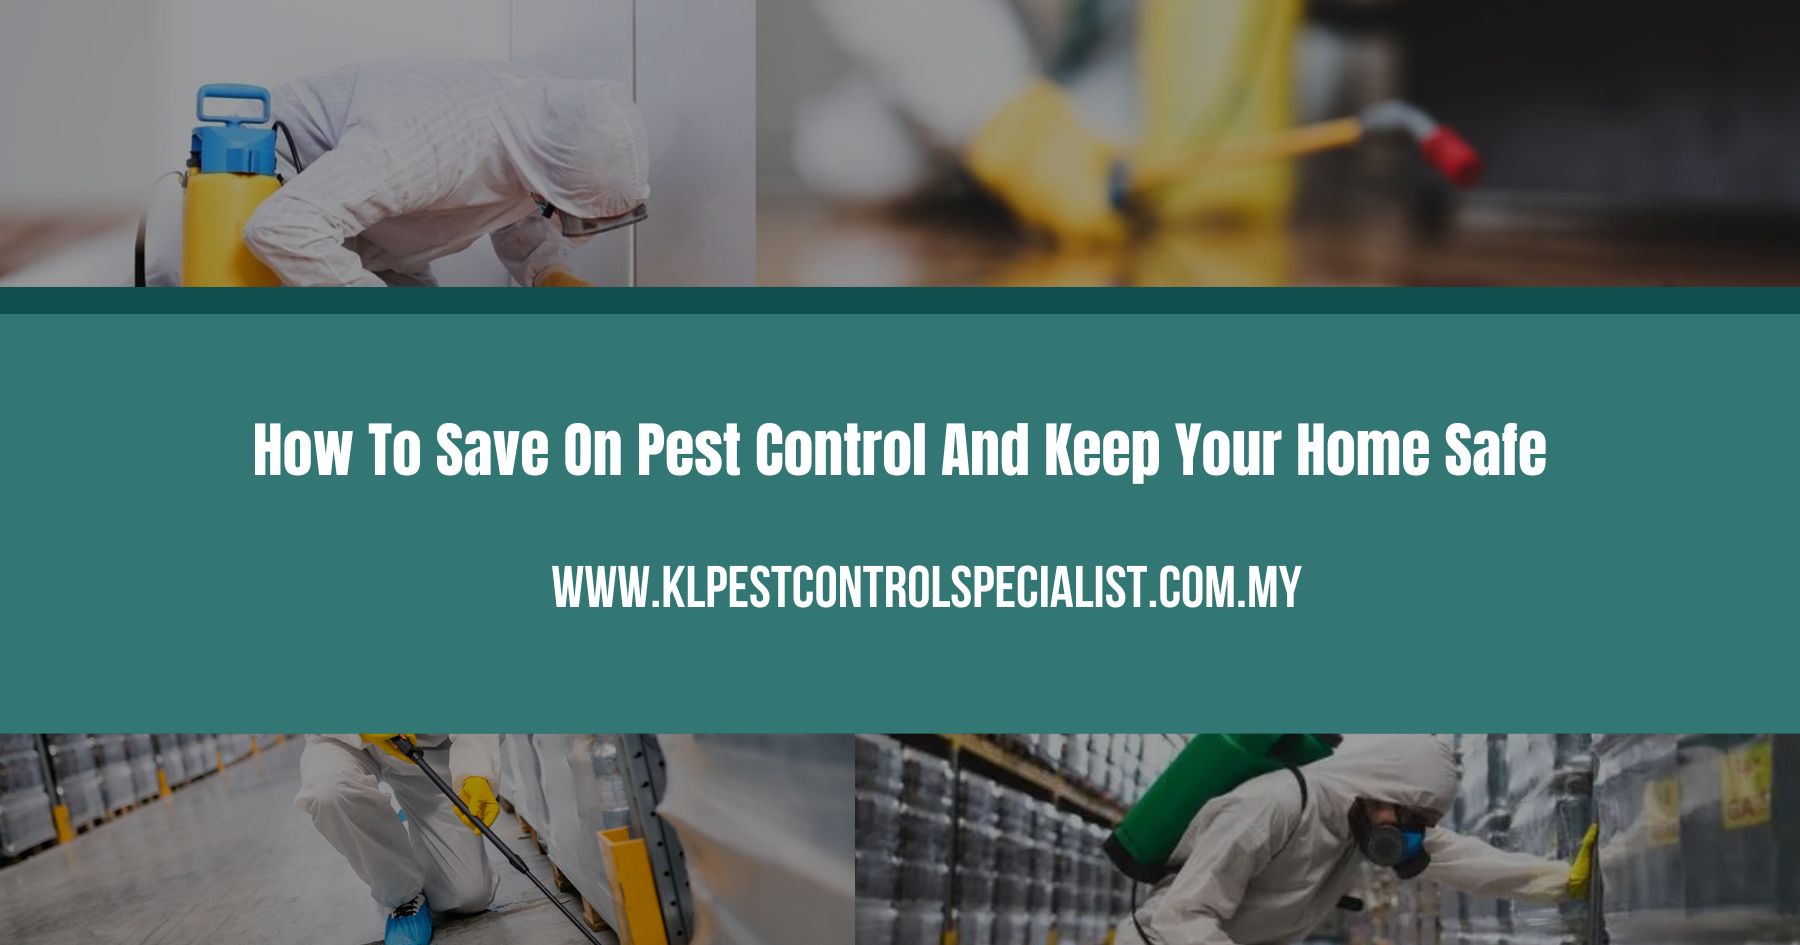 How To Save On Pest Control And Keep Your Home Safe